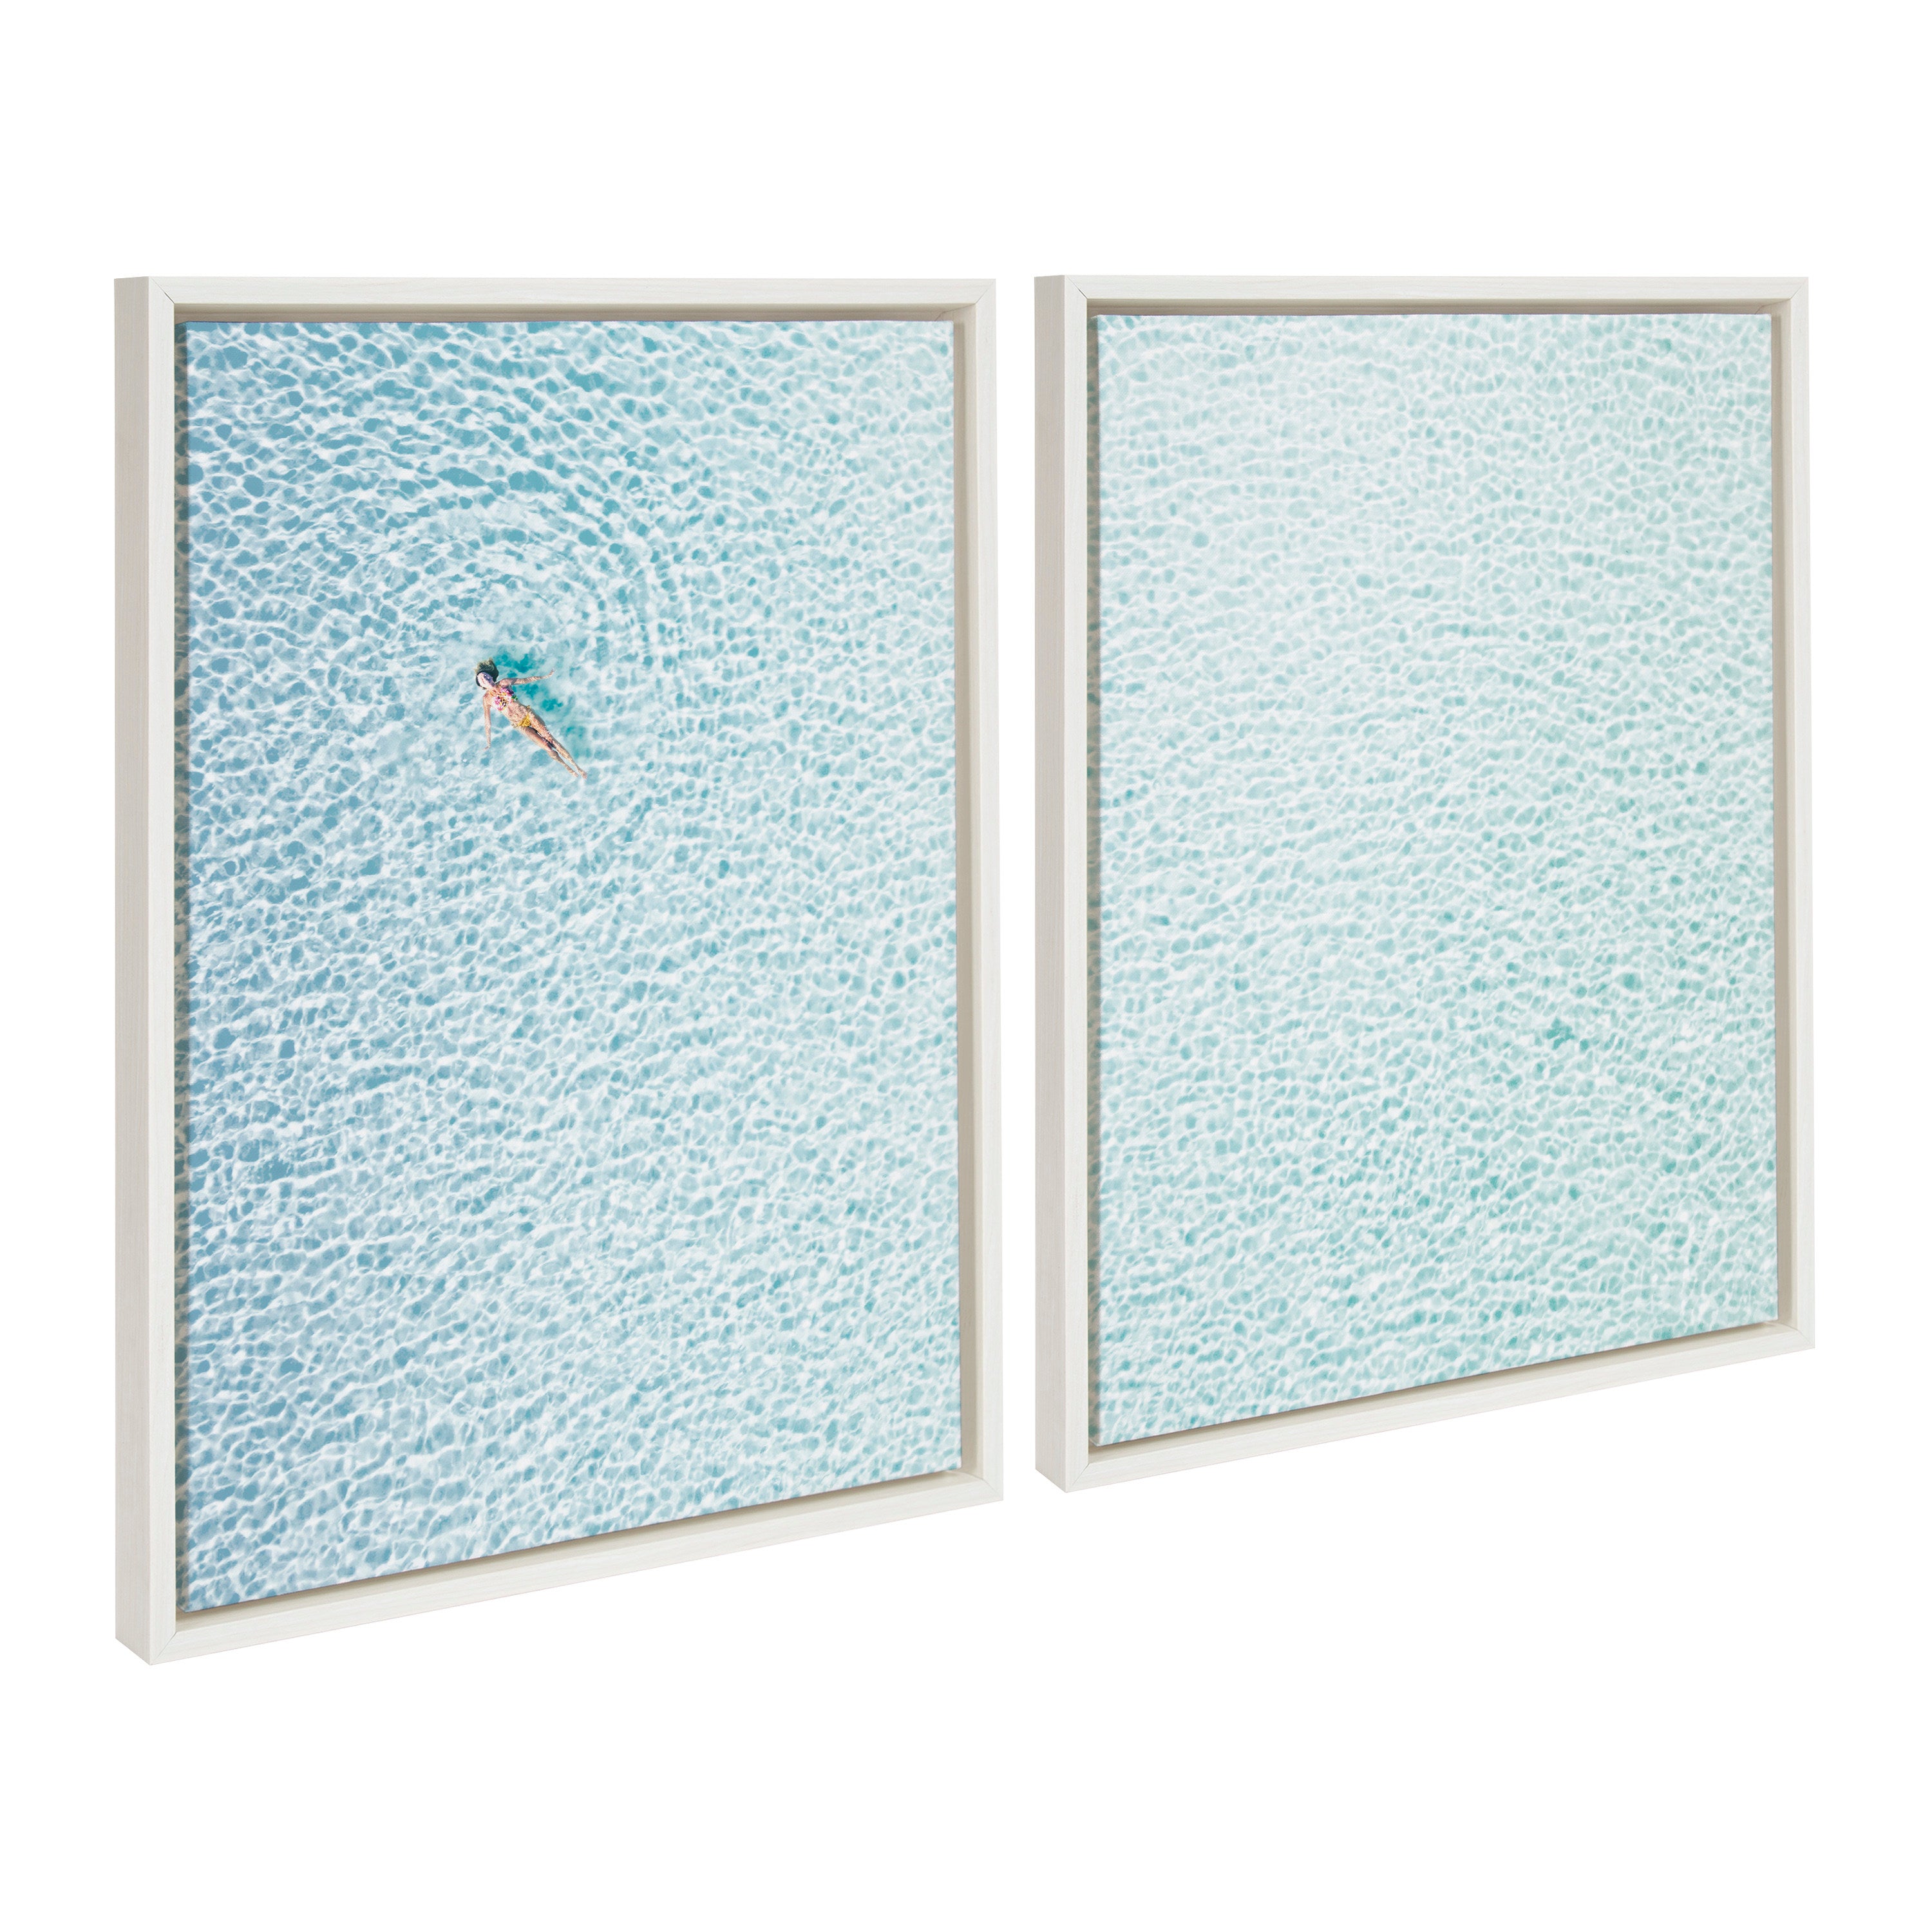 Sylvie Woman Floating I and II Framed Canvas by Amy Peterson Art Studio